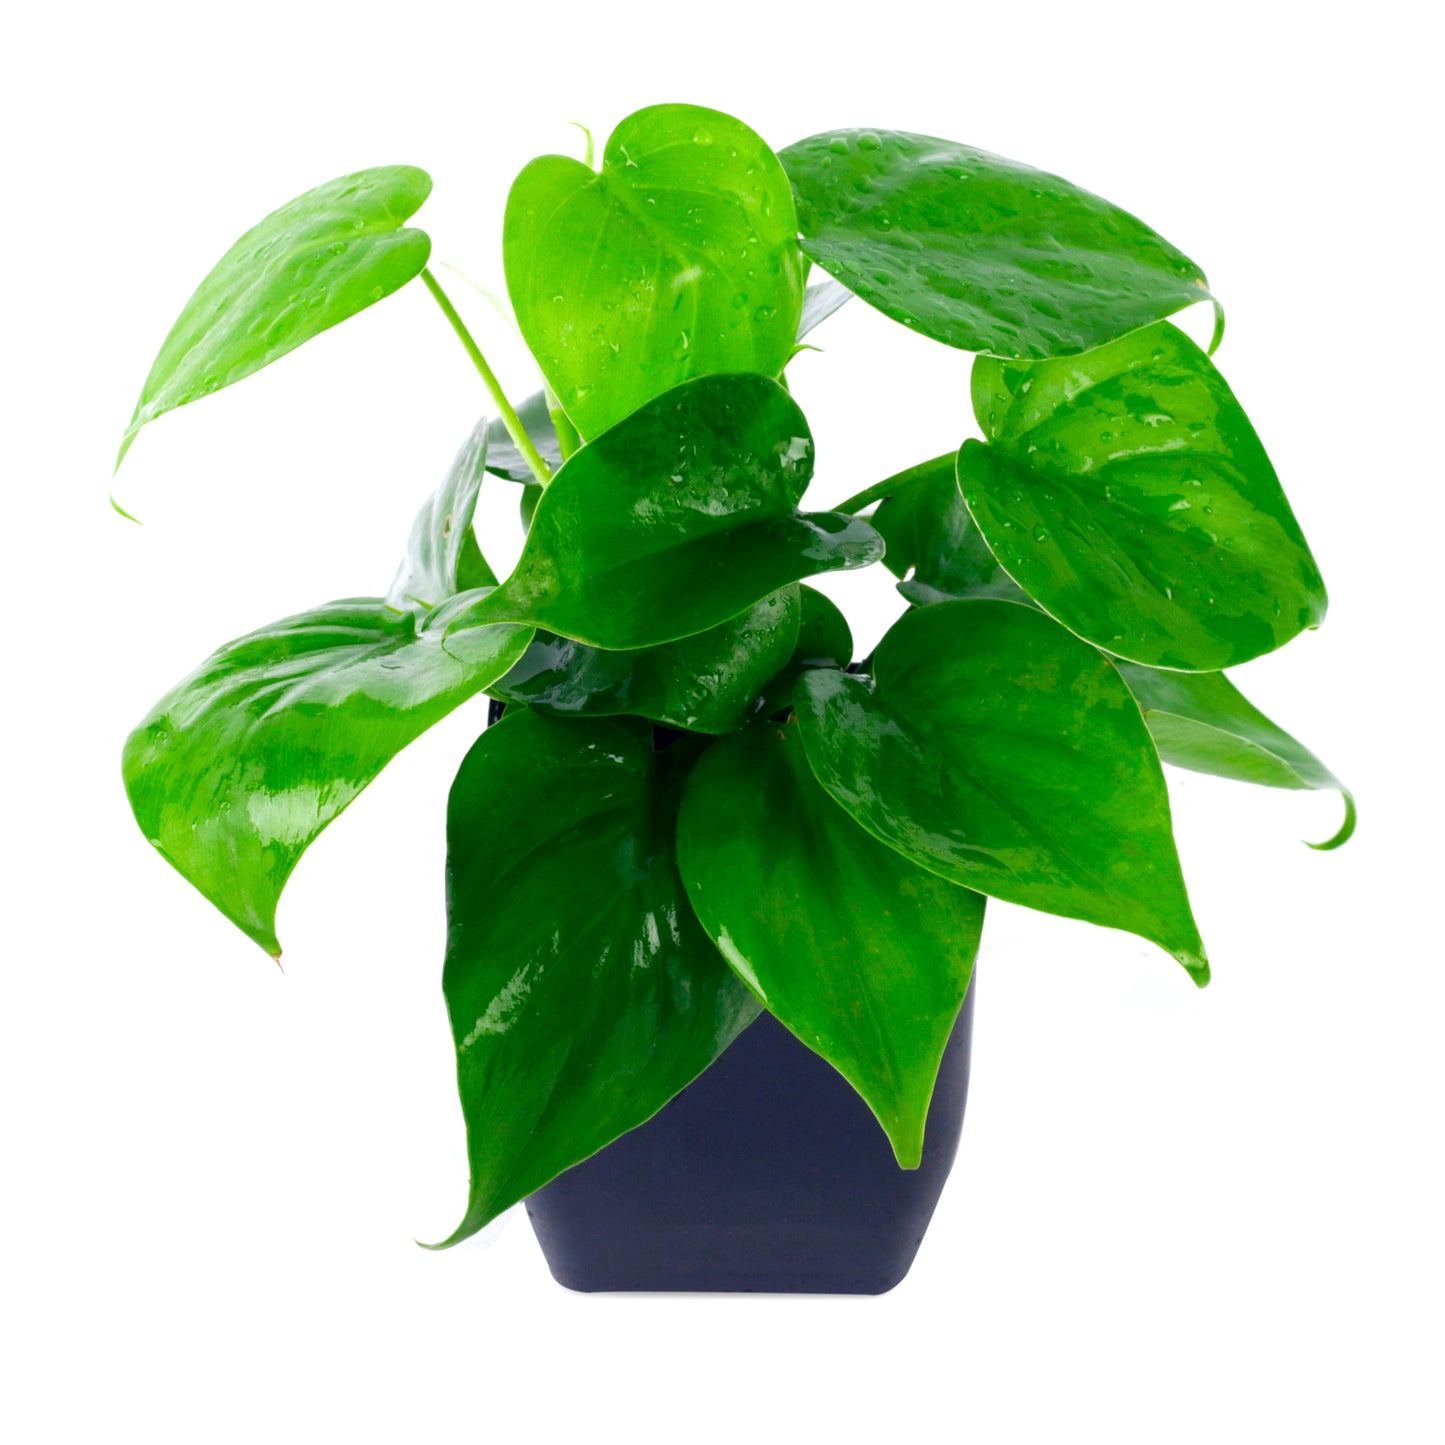 Combo of Green Money Plant In Black Pot with Jade Plant in White/Blue Pot